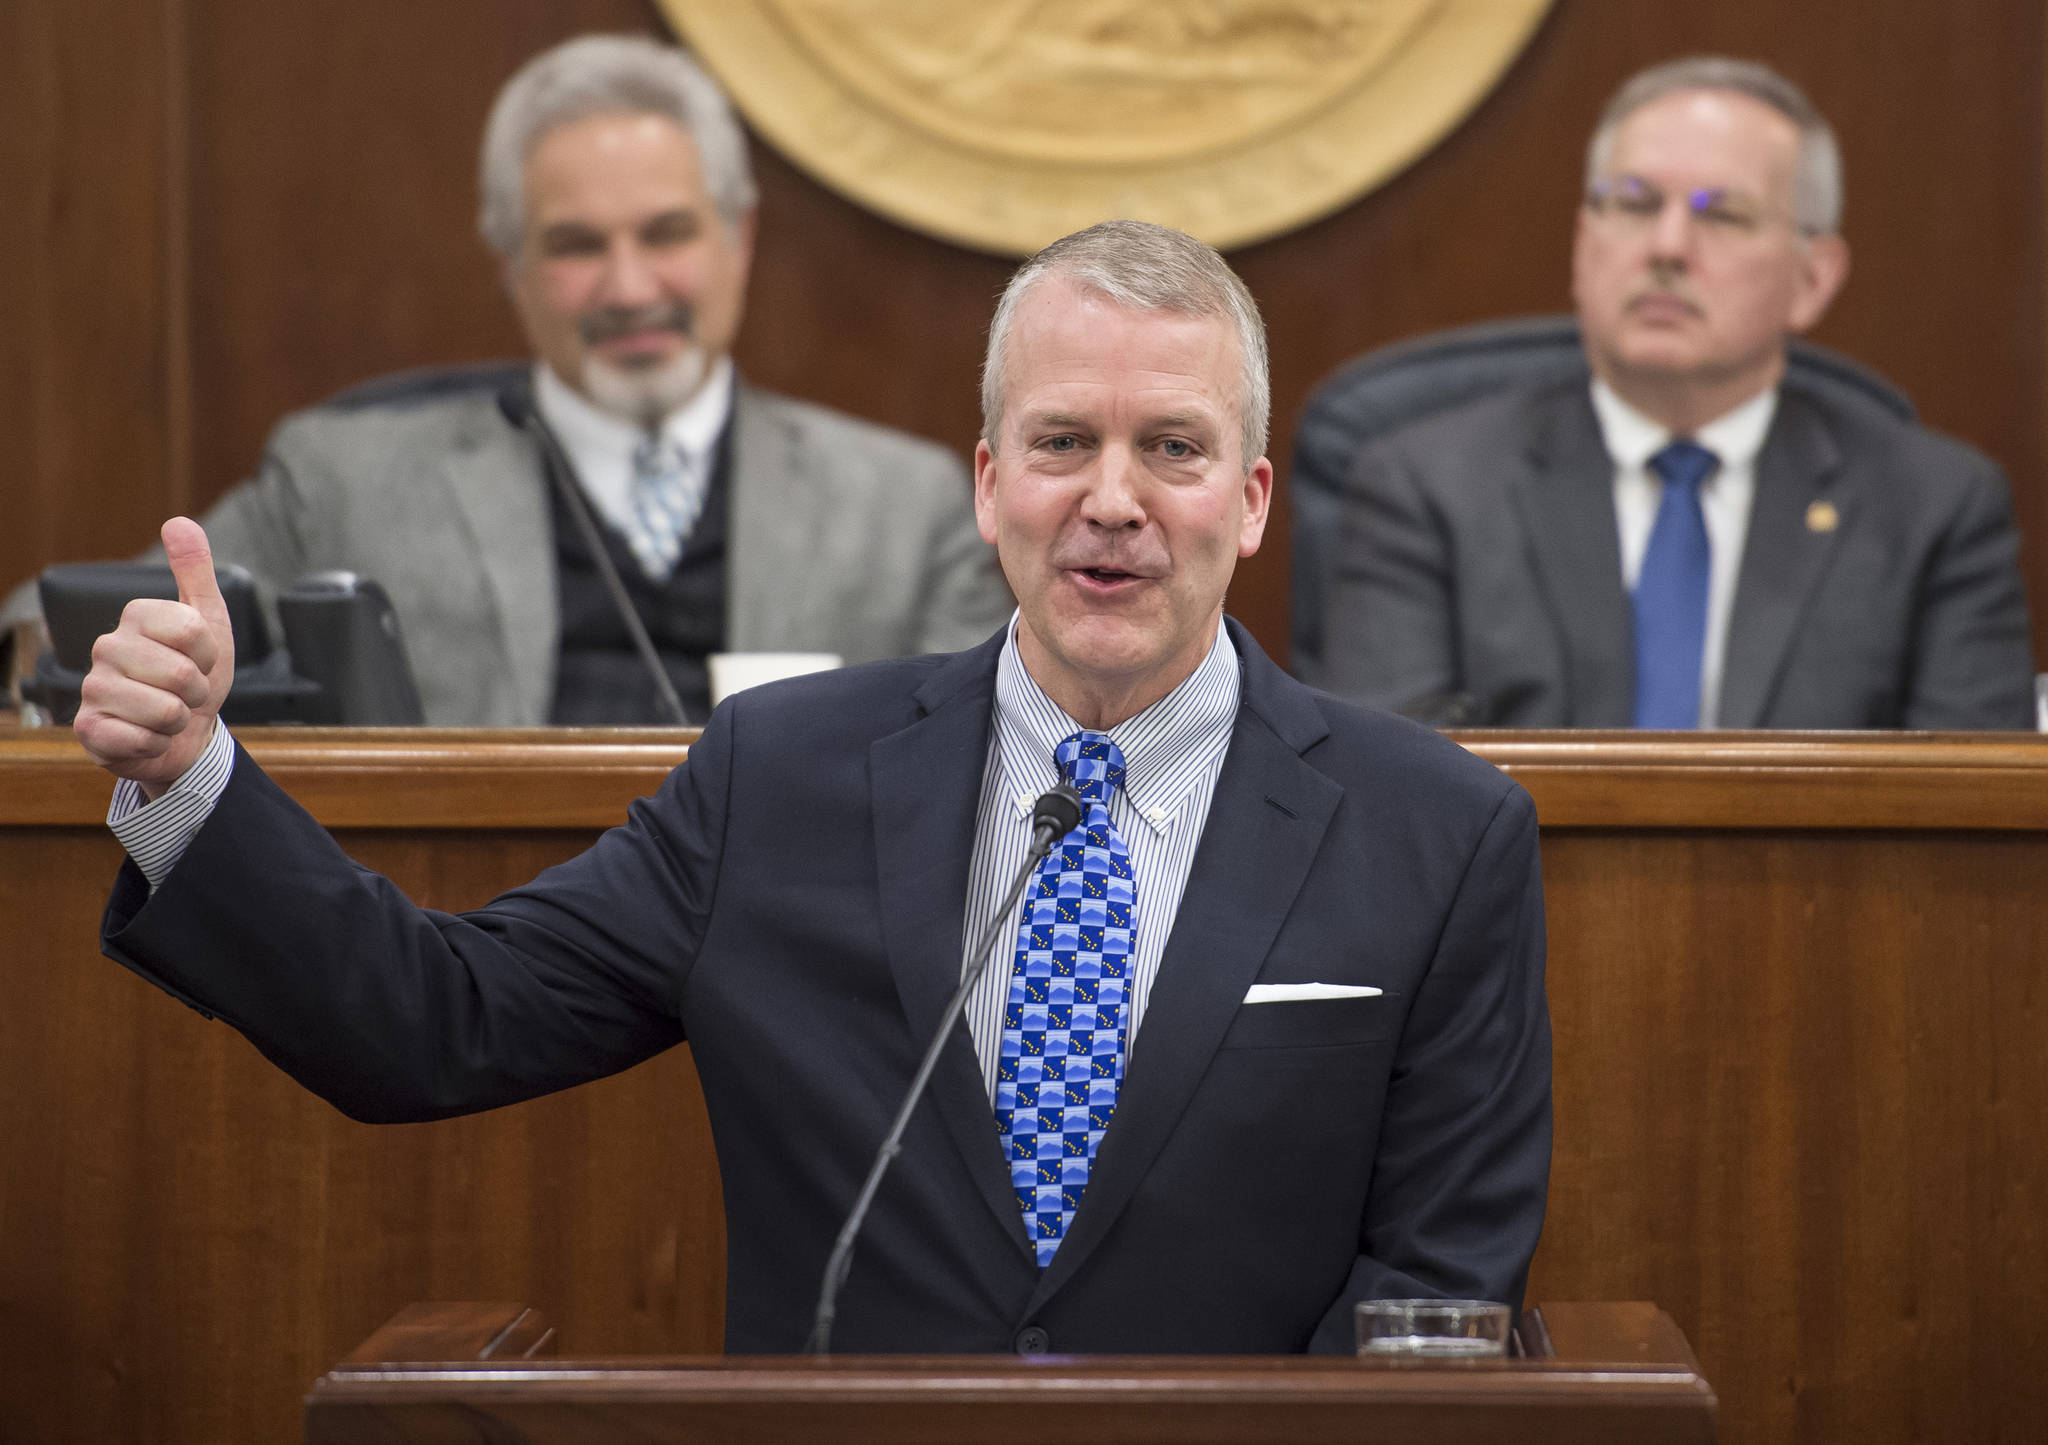 In this Feb. 26 photo, U.S. Sen. Dan Sullivan, R-Alaska, gives a thumbs up while speaking about the opening of the Arctic National Wildlife Refuge to oil drilling during his annual speech to a joint session of the Alaska Legislature at the Capitol. (Michael Penn | Juneau Empire File)